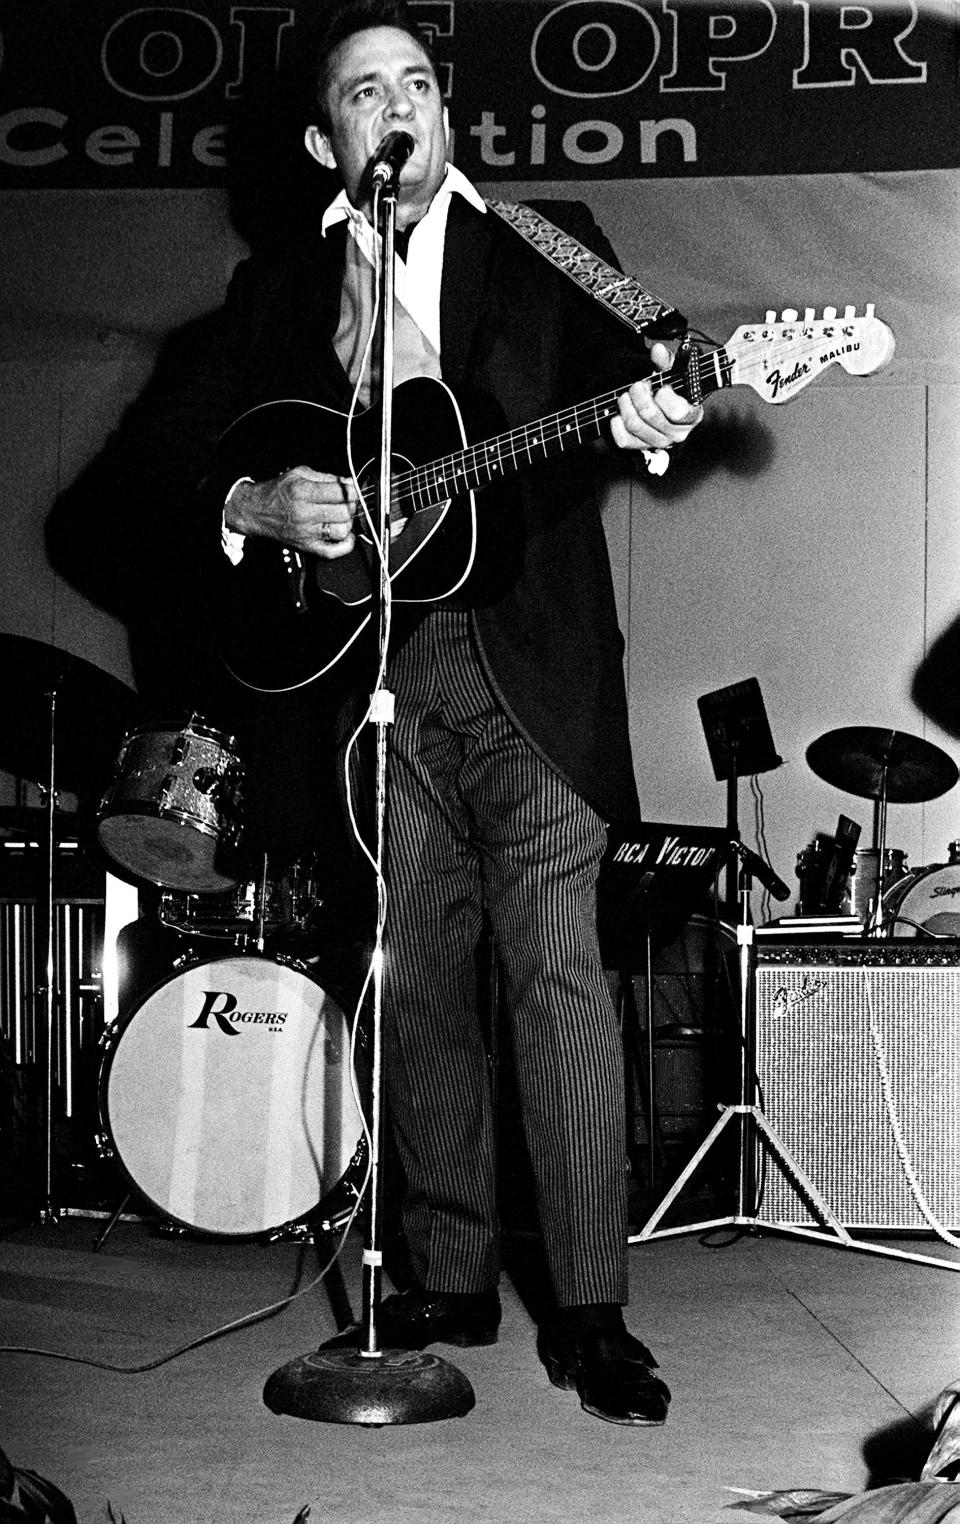 Johnny Cash sang his hit, "Folsom Prision Blues," for the crowd during the Columbia Records luncheon show at Municipal Auditorium on the last day of the 16th annual Country Music D.J. Convention Oct. 19, 1968.